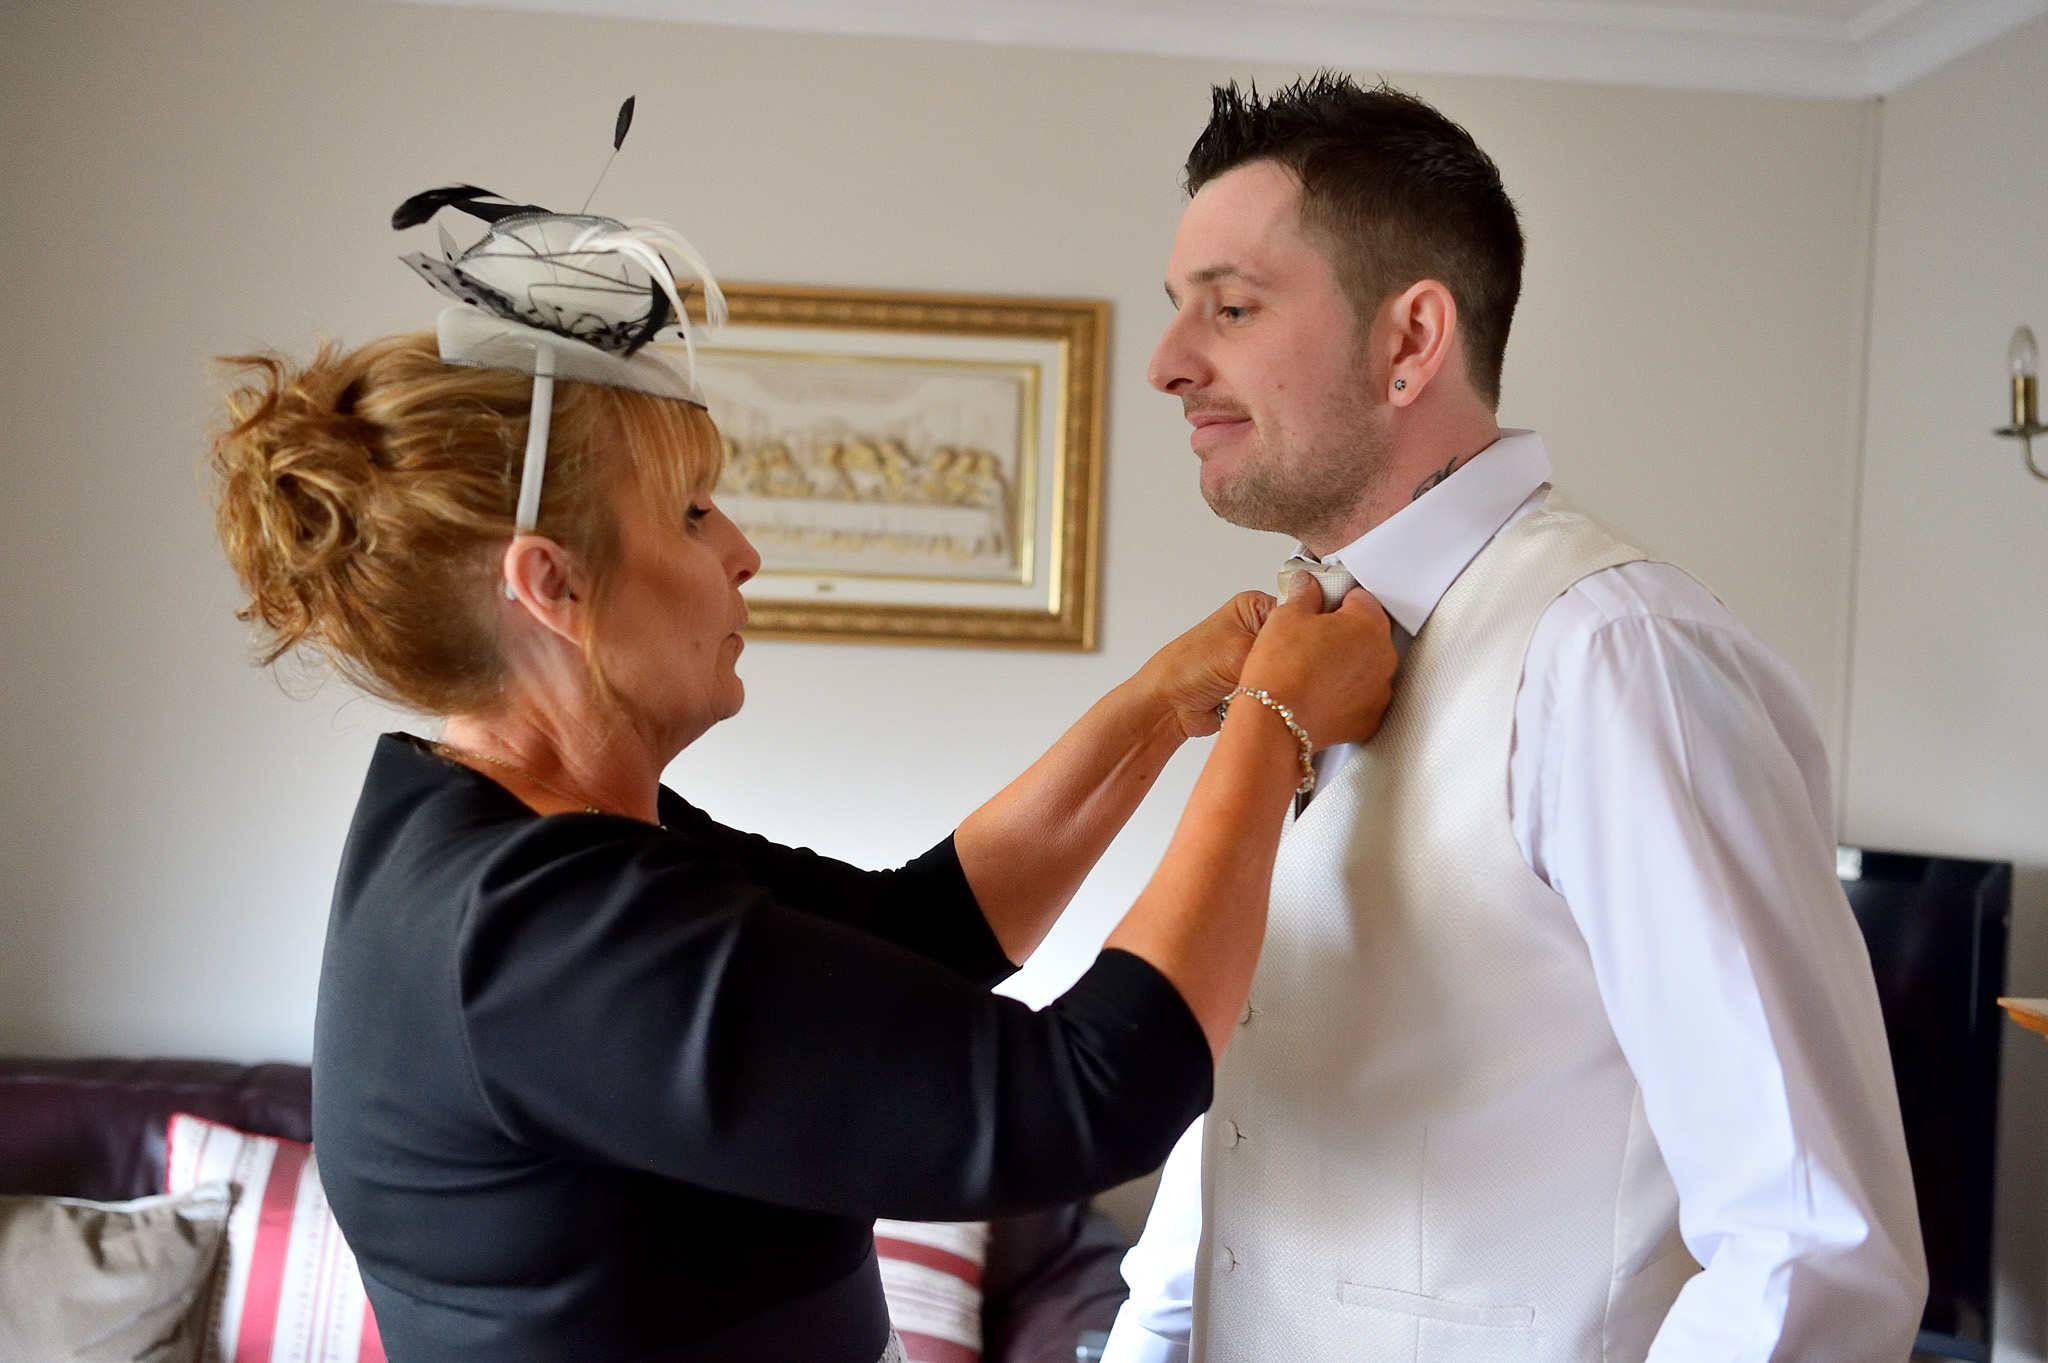 Weddings photography, mother and son